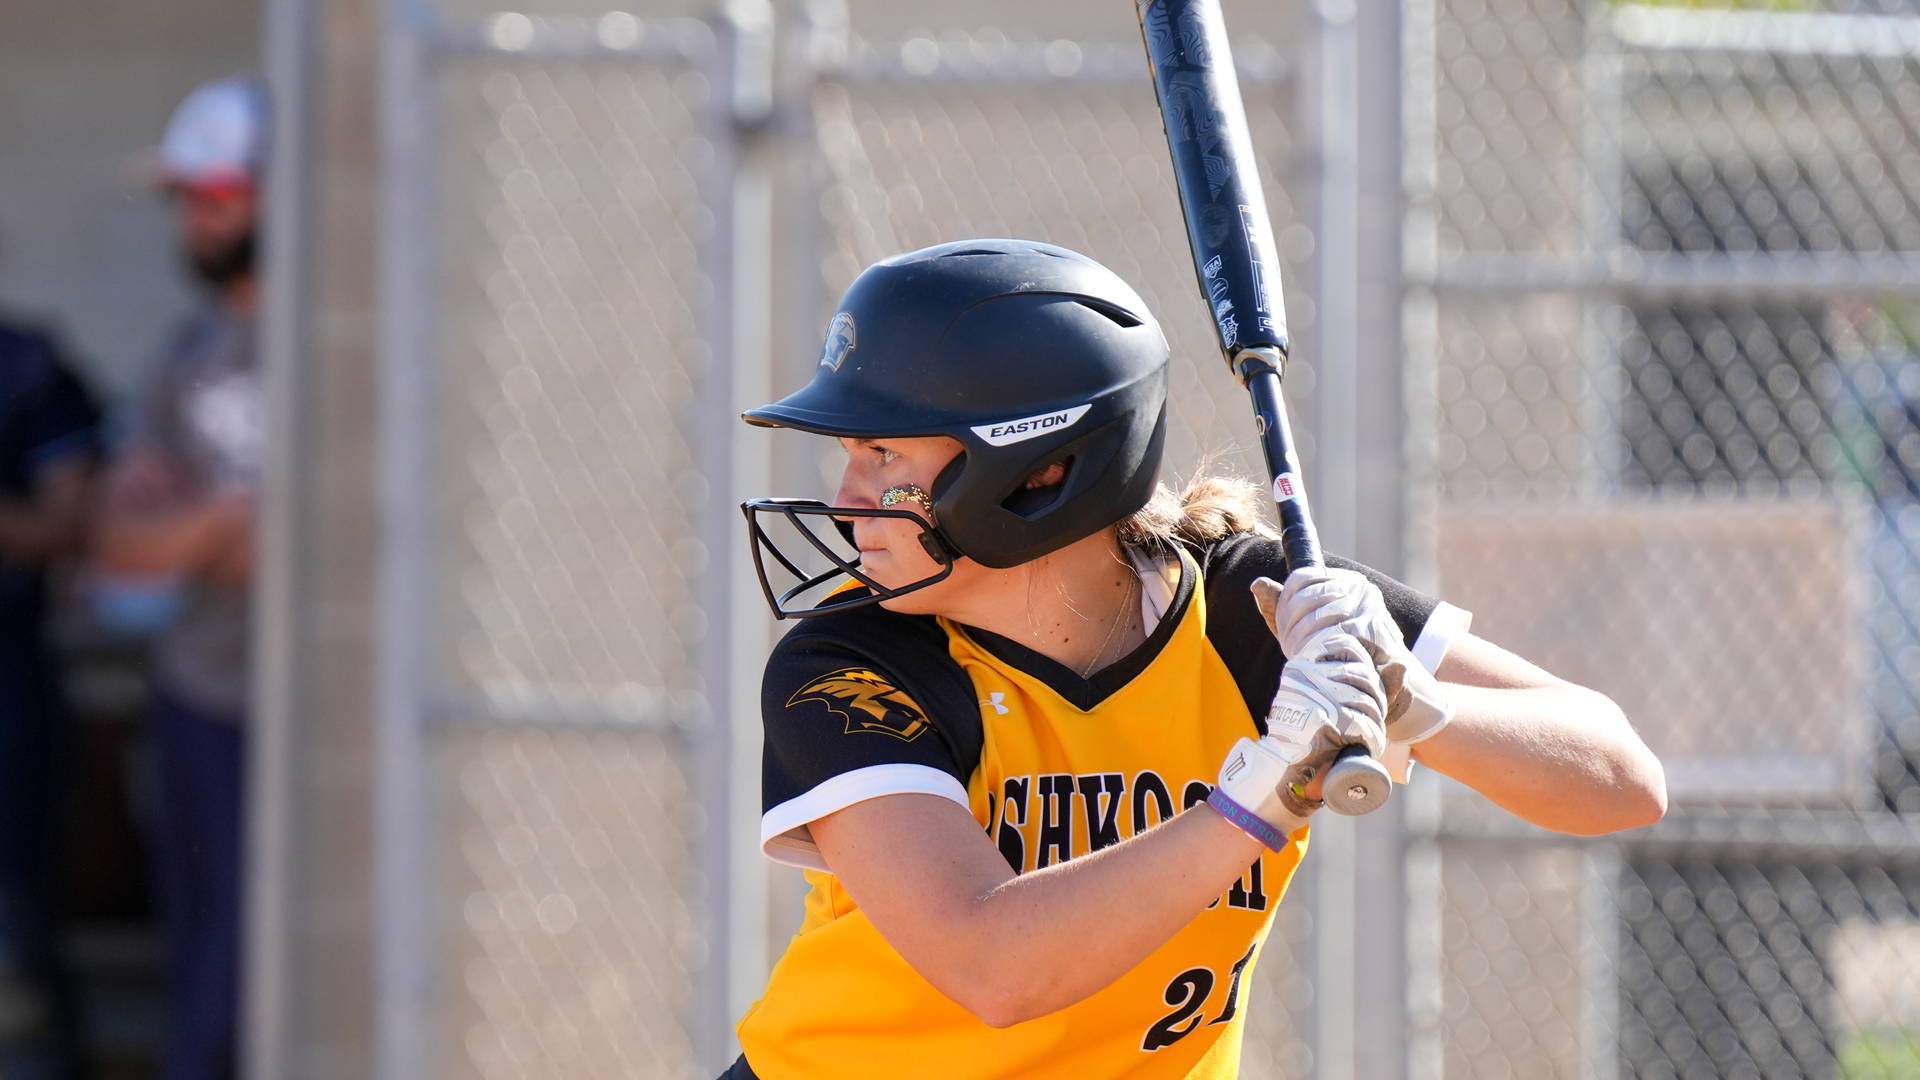 Abby Garceau went 2-for-3 with three RBIs and a double in the Titans' win over Saint Benedict in the first round of the NCAA Tournament on Thursday. Photo Credit: Terri Cole, UW-Oshkosh Sports Information